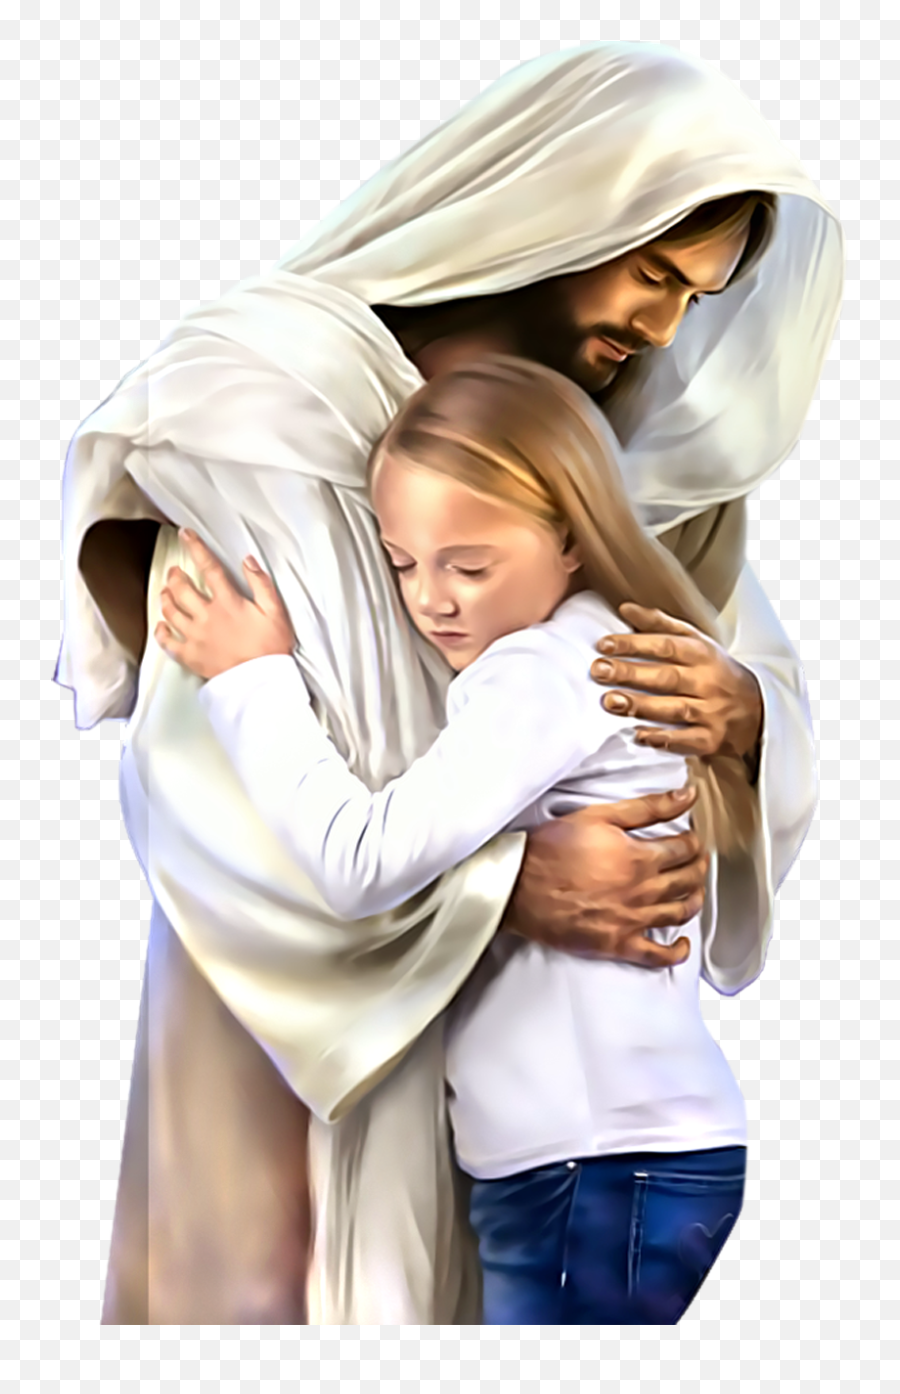 Jesus Christ Png Image Without Hands